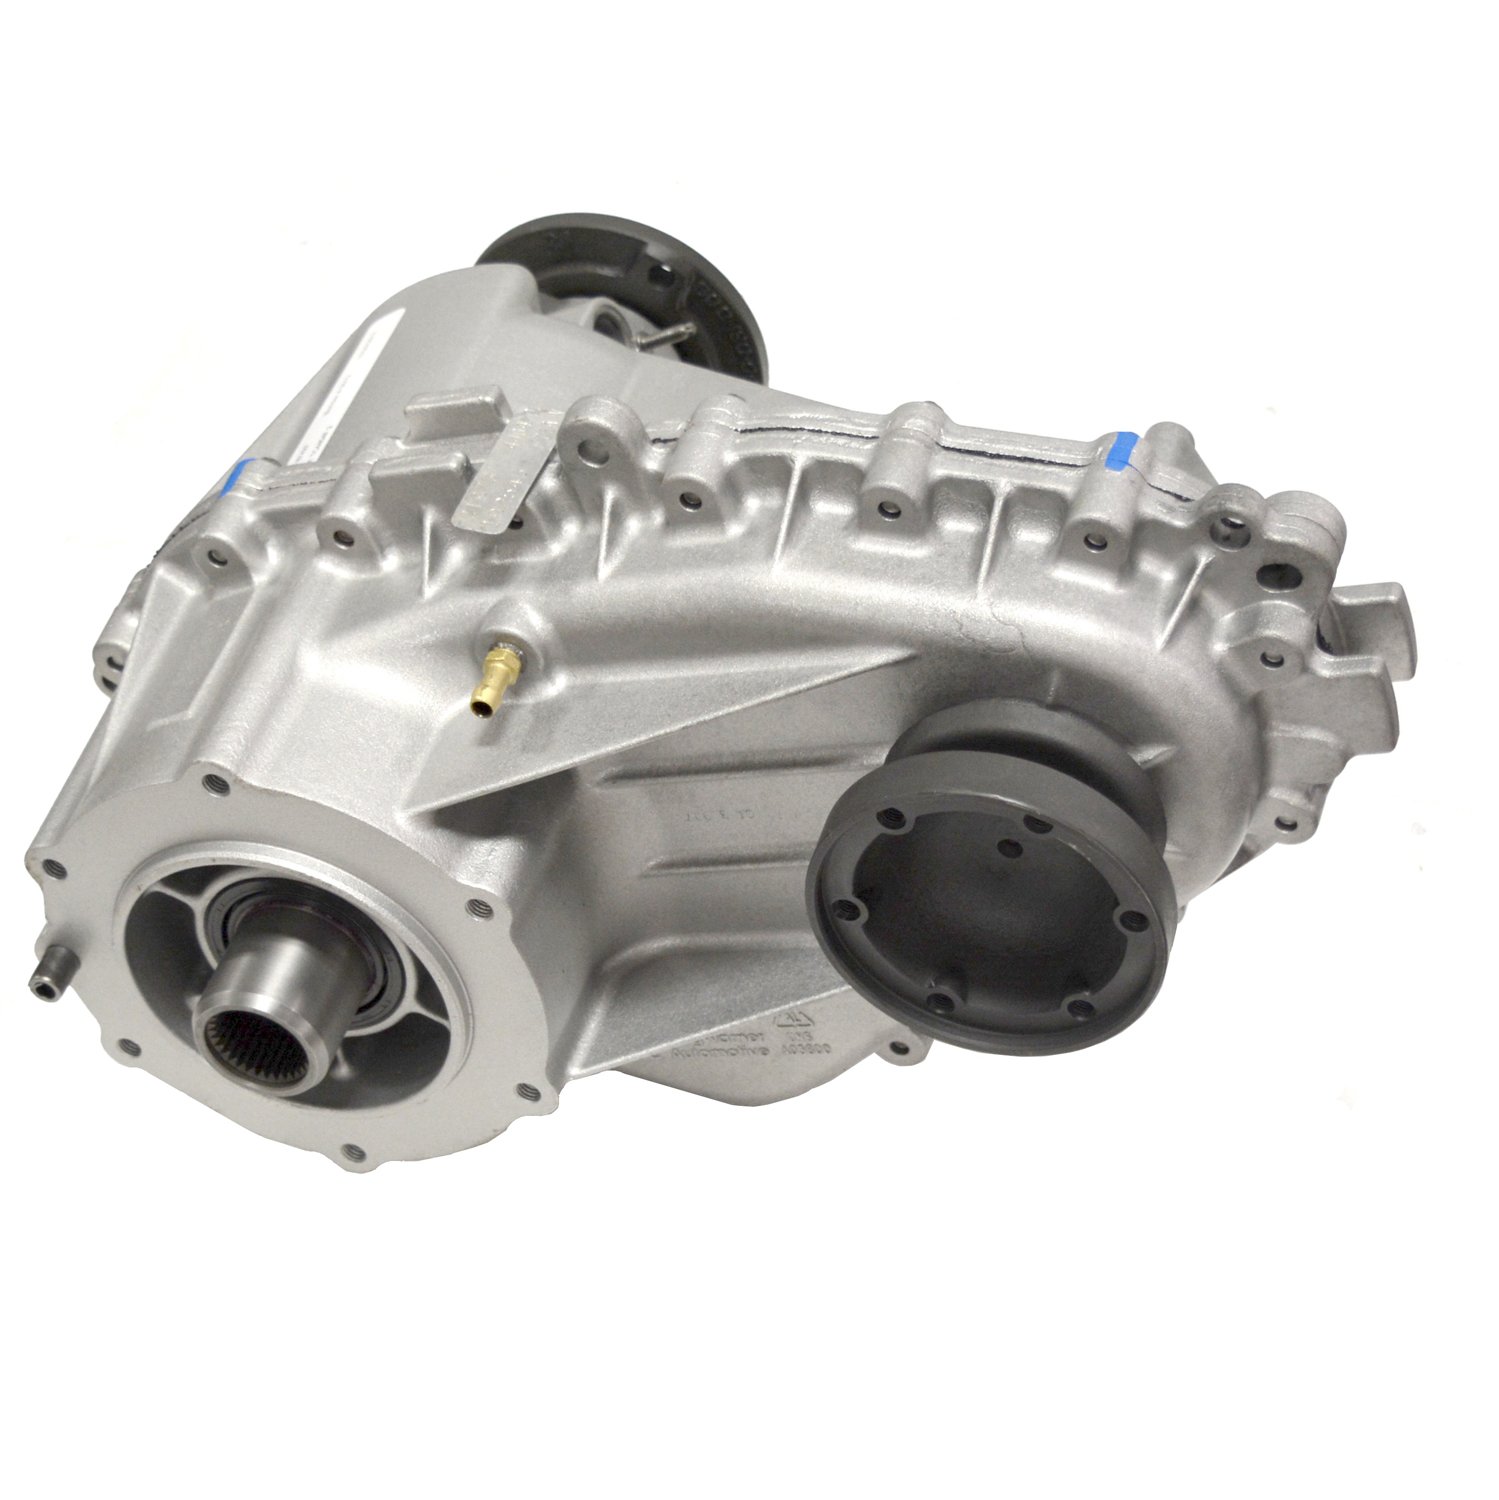 Remanufactured BW4404 Transfer Case for Ford 1997 Explorer & Mountaineer